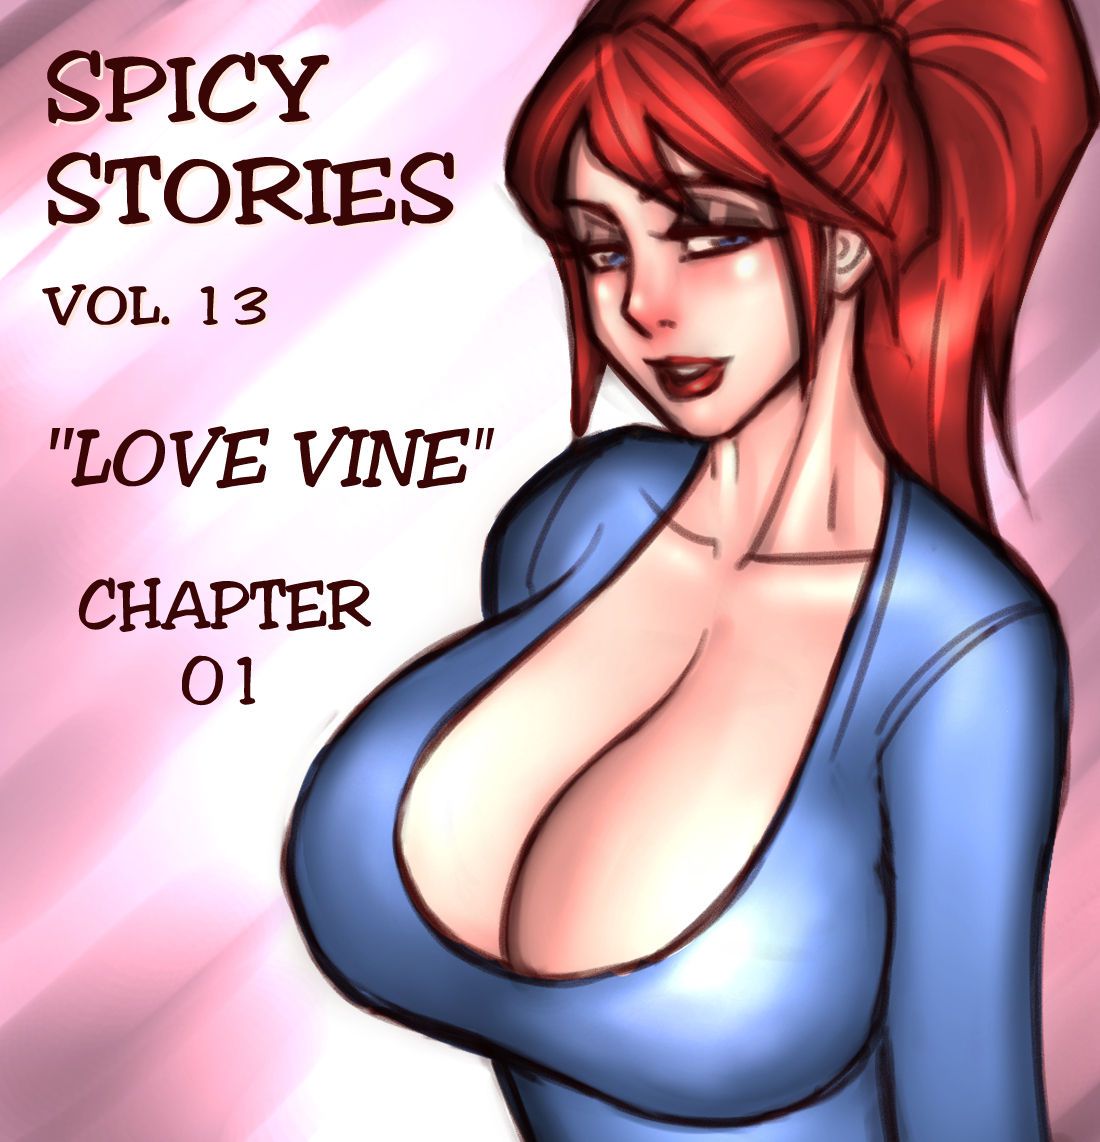 NGT Spicy Stories 13 - Love Vine (Ongoing) NGT Spicy Stories 13 - Love Vine (Ongoing) 1